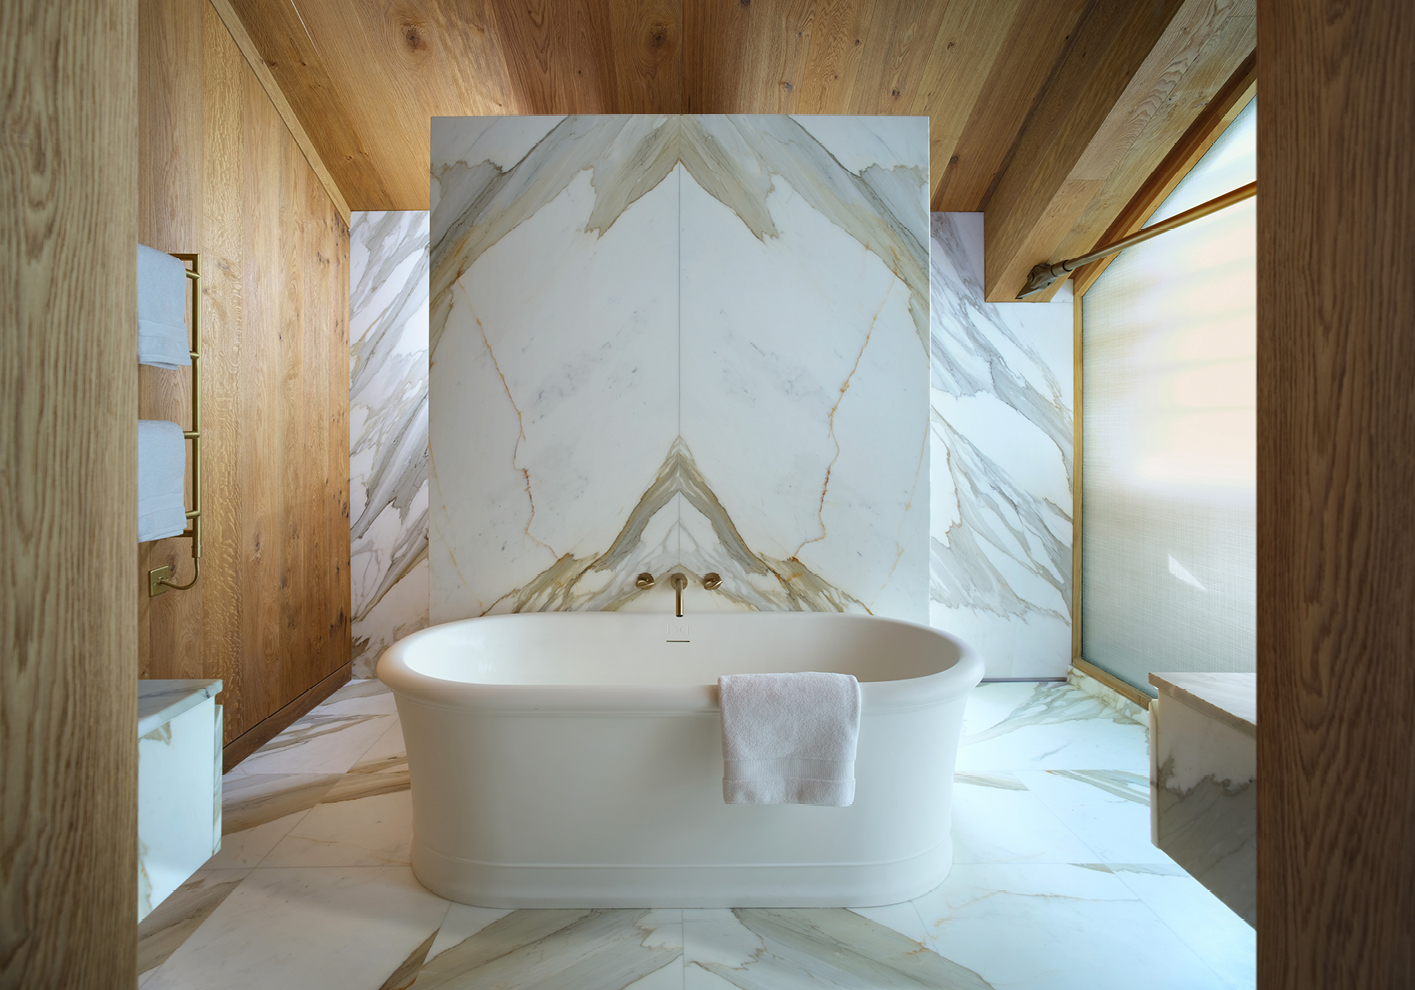 Each bedroom comes with an exquisite marble en suite (Photograph by Philipe Vile)